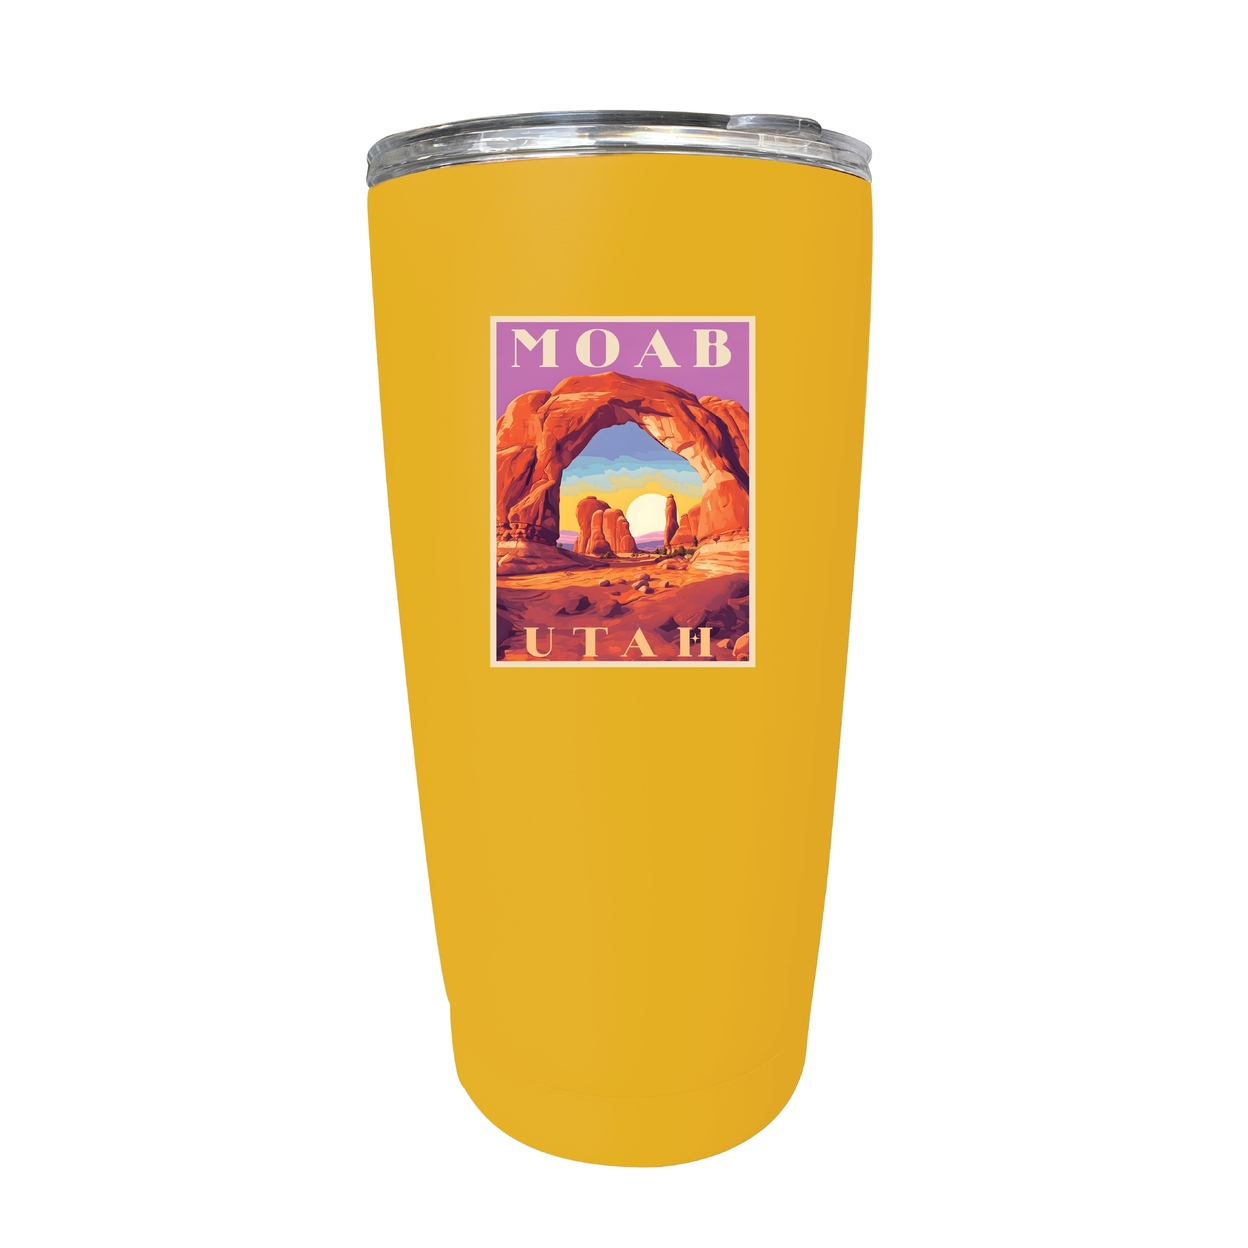 Moab Utah Souvenir 16 Oz Stainless Steel Insulated Tumbler - Yellow,,2-Pack